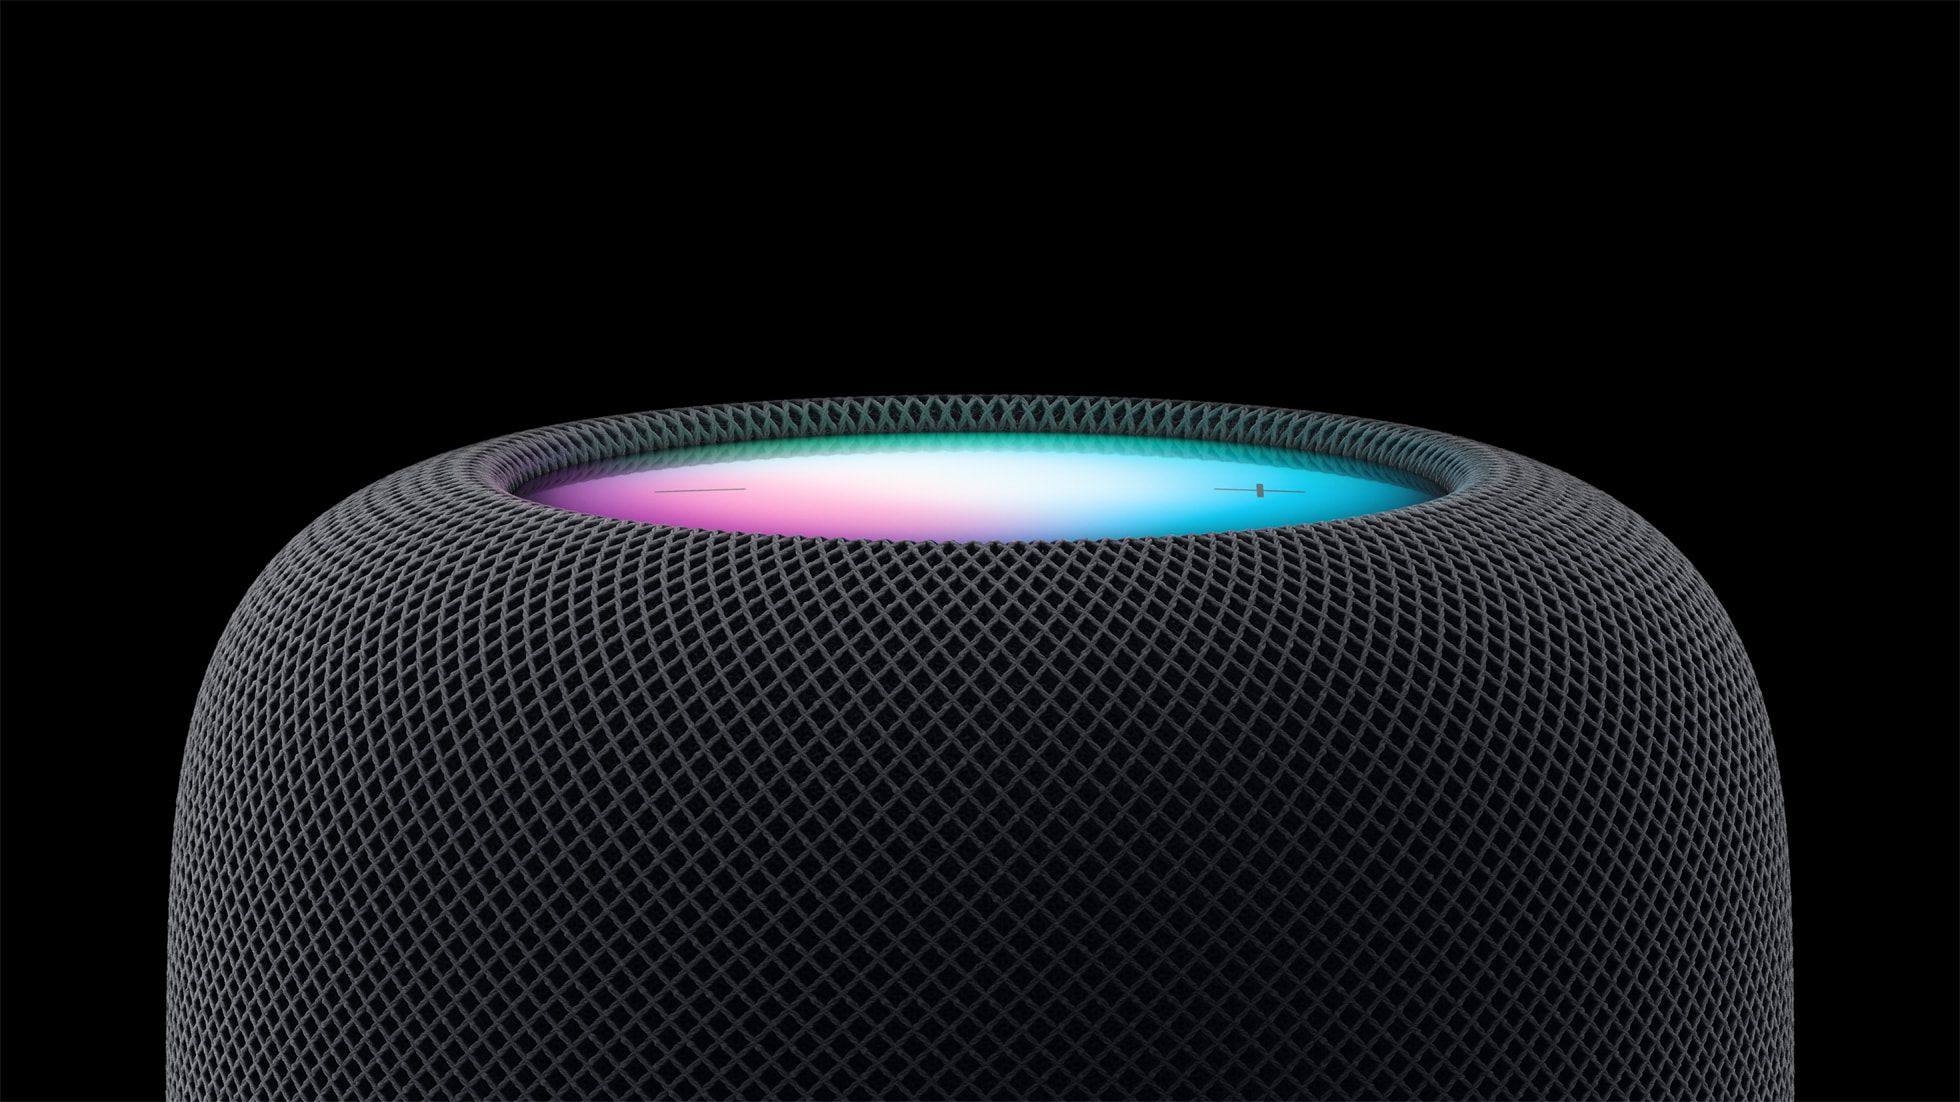 Everything That's Changed in the New 2023 HomePod - macrumors.com